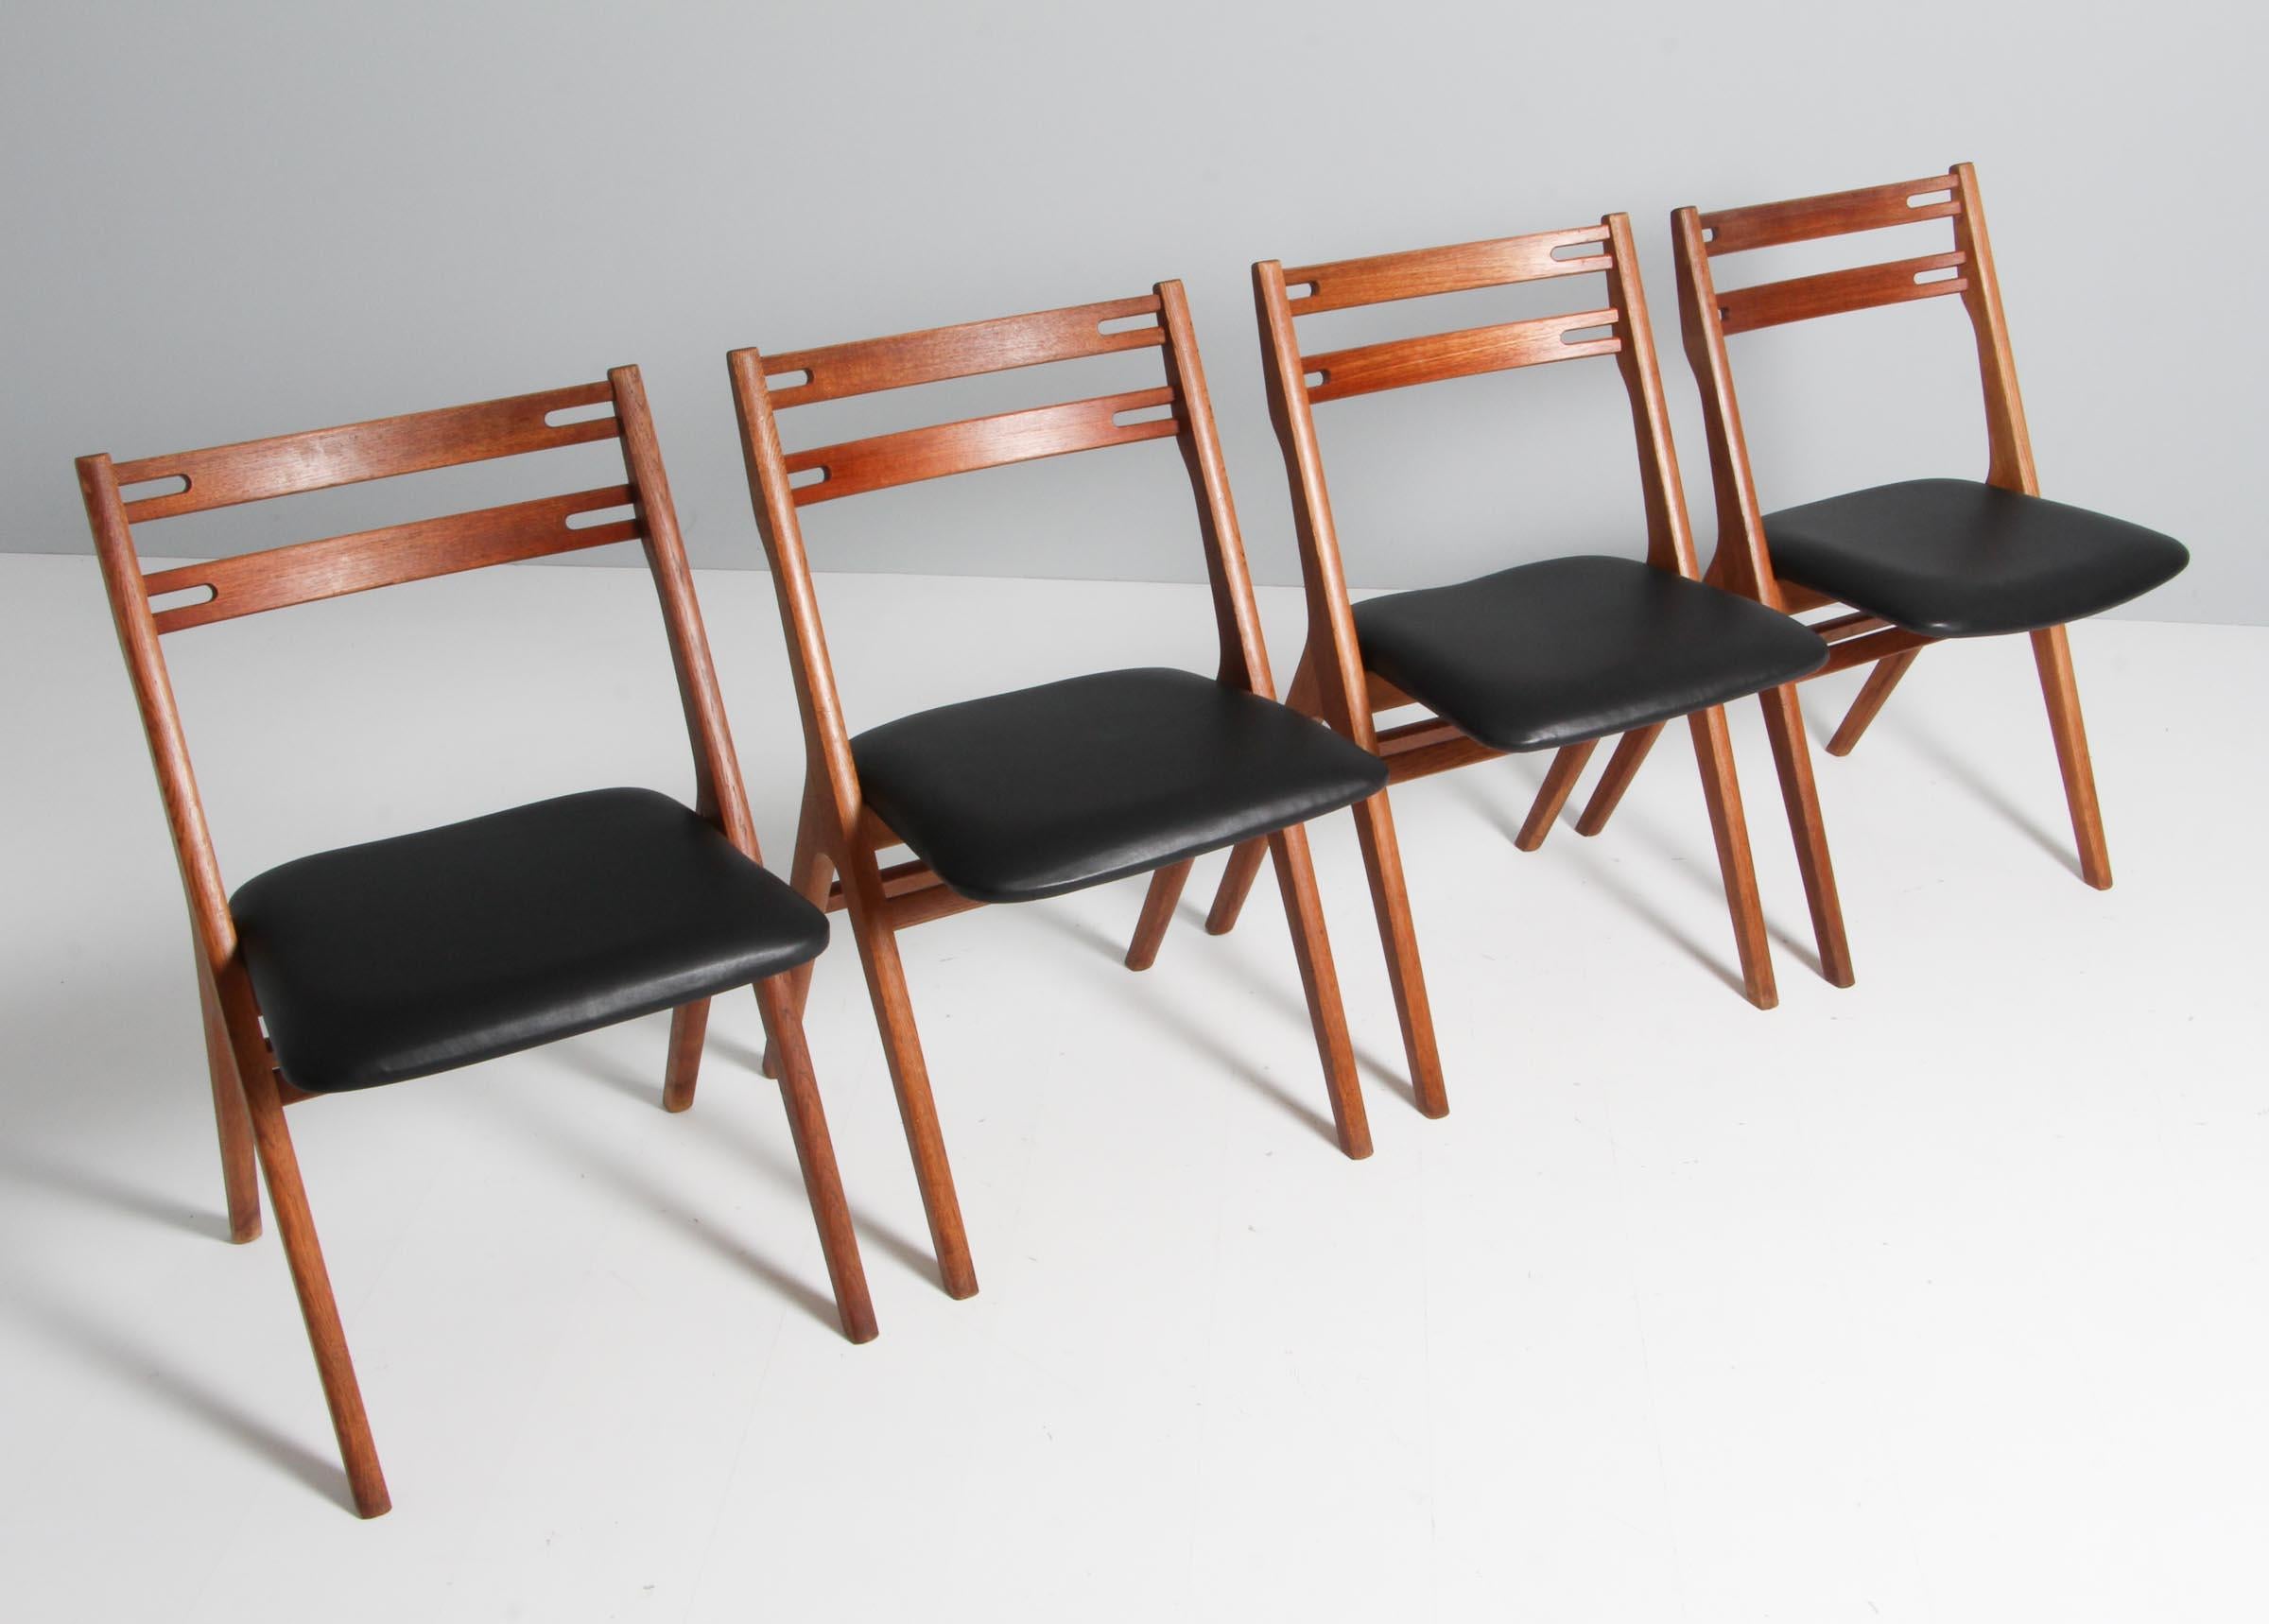 Edmund Jørgenset set of four chairs in oak and teak. New upholstered with black aniline leather.